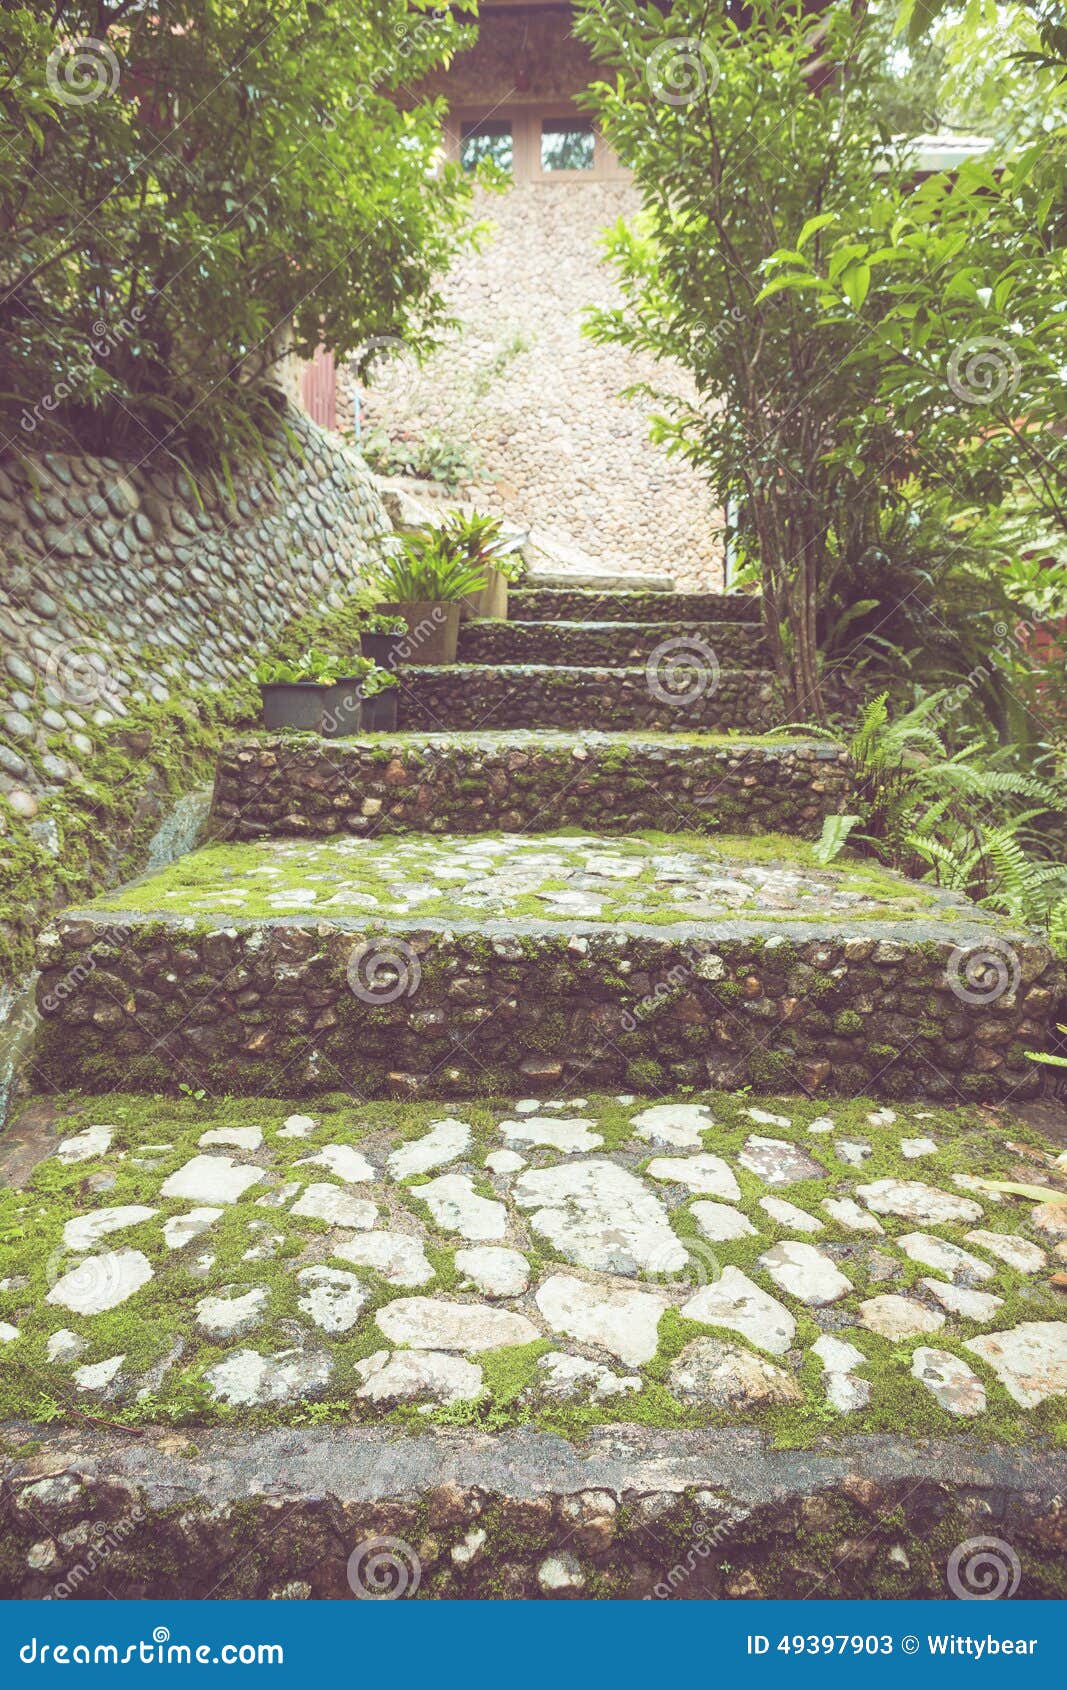 Stone Floor Pattern In Garden Stock Image Image Of Pavement